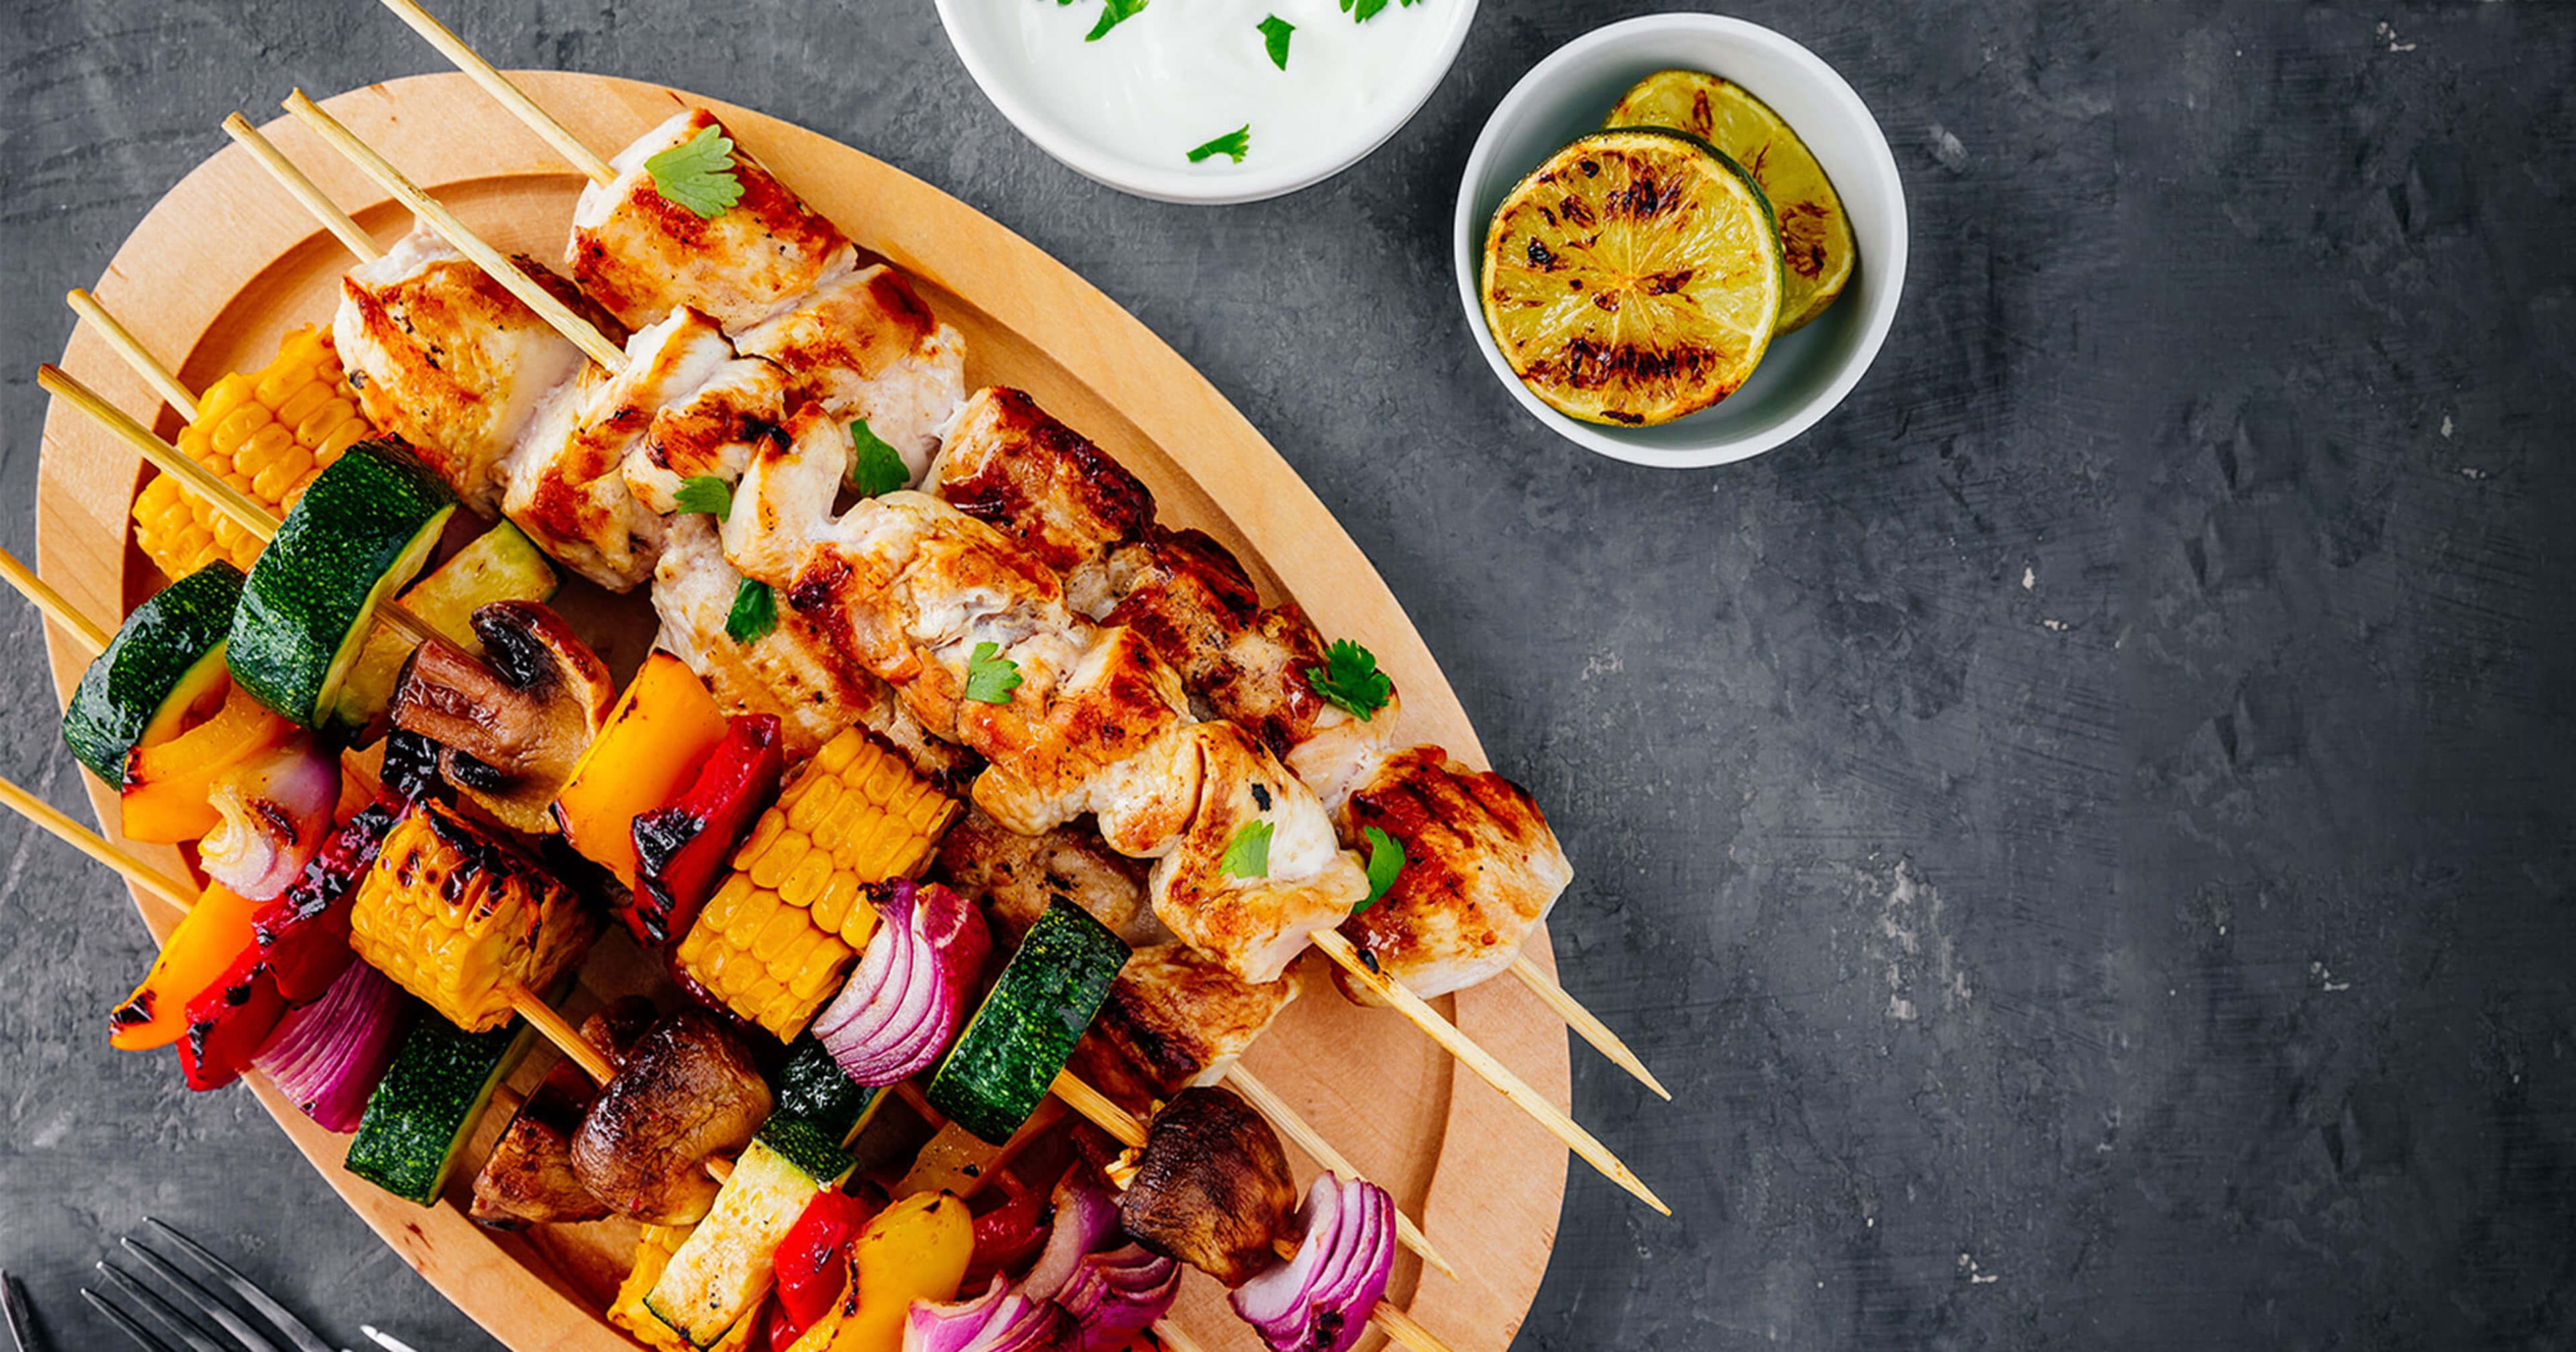 Healthy BBQ Ideas: 9 Smart Tips for Your Next Cookout